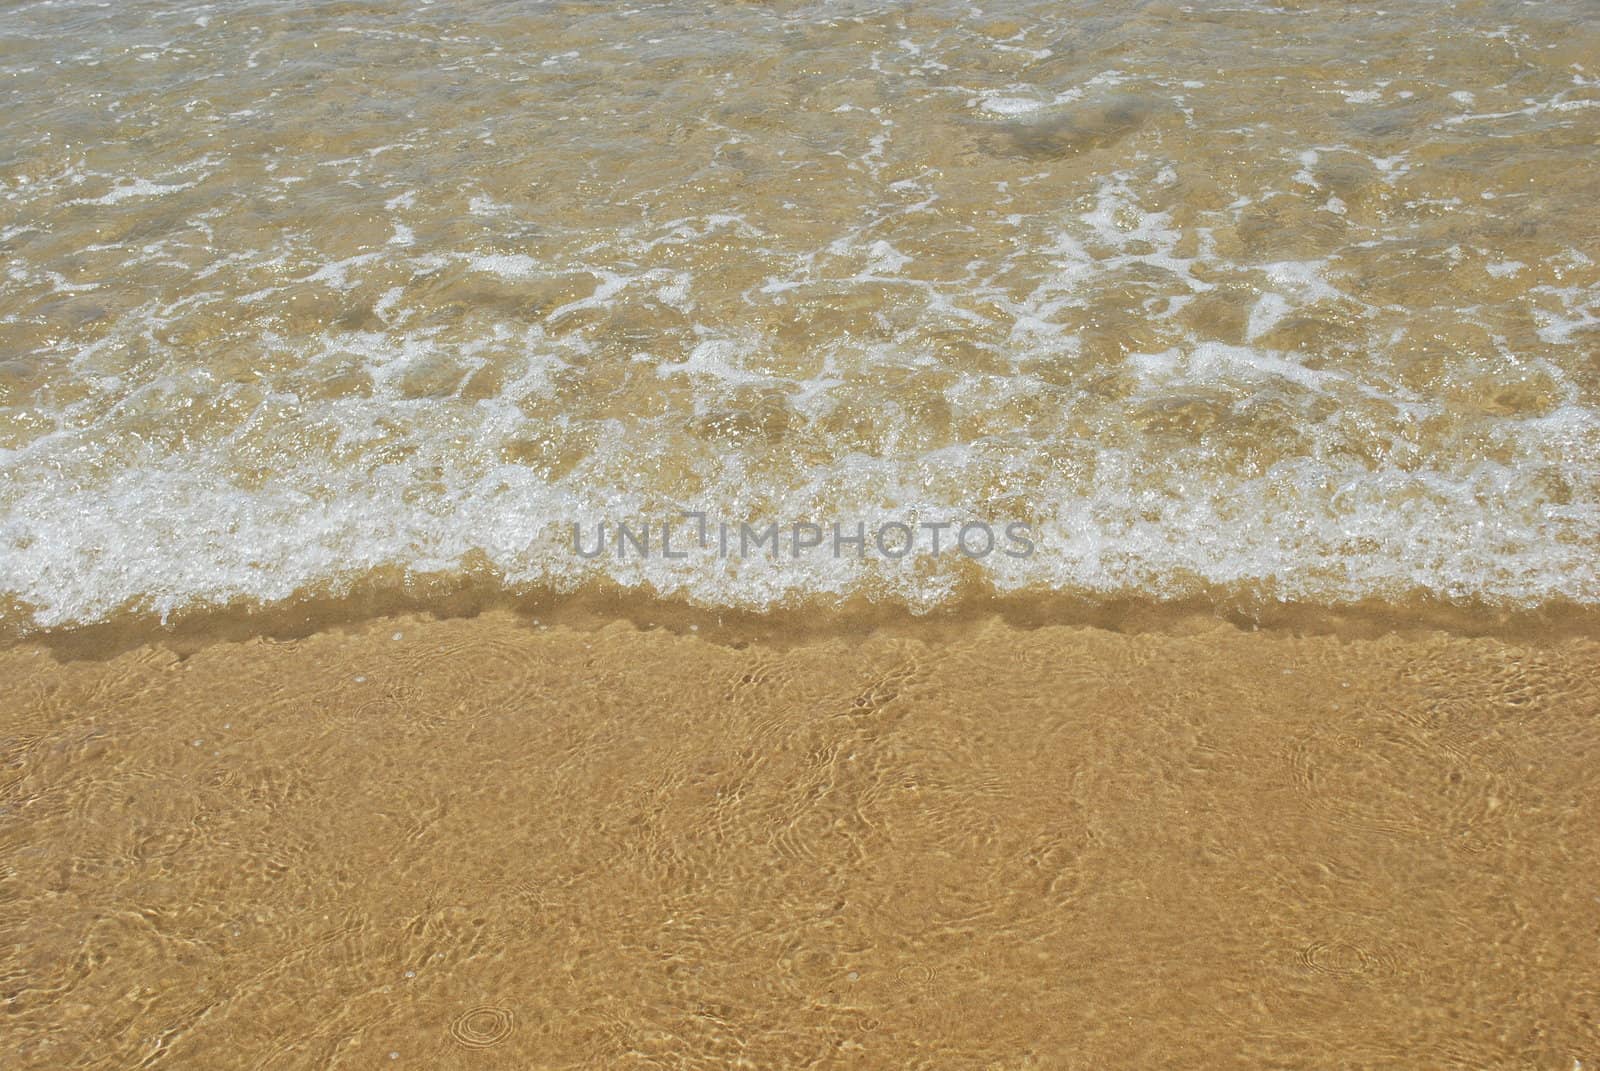 photo of ocean's water on a beautiful beach